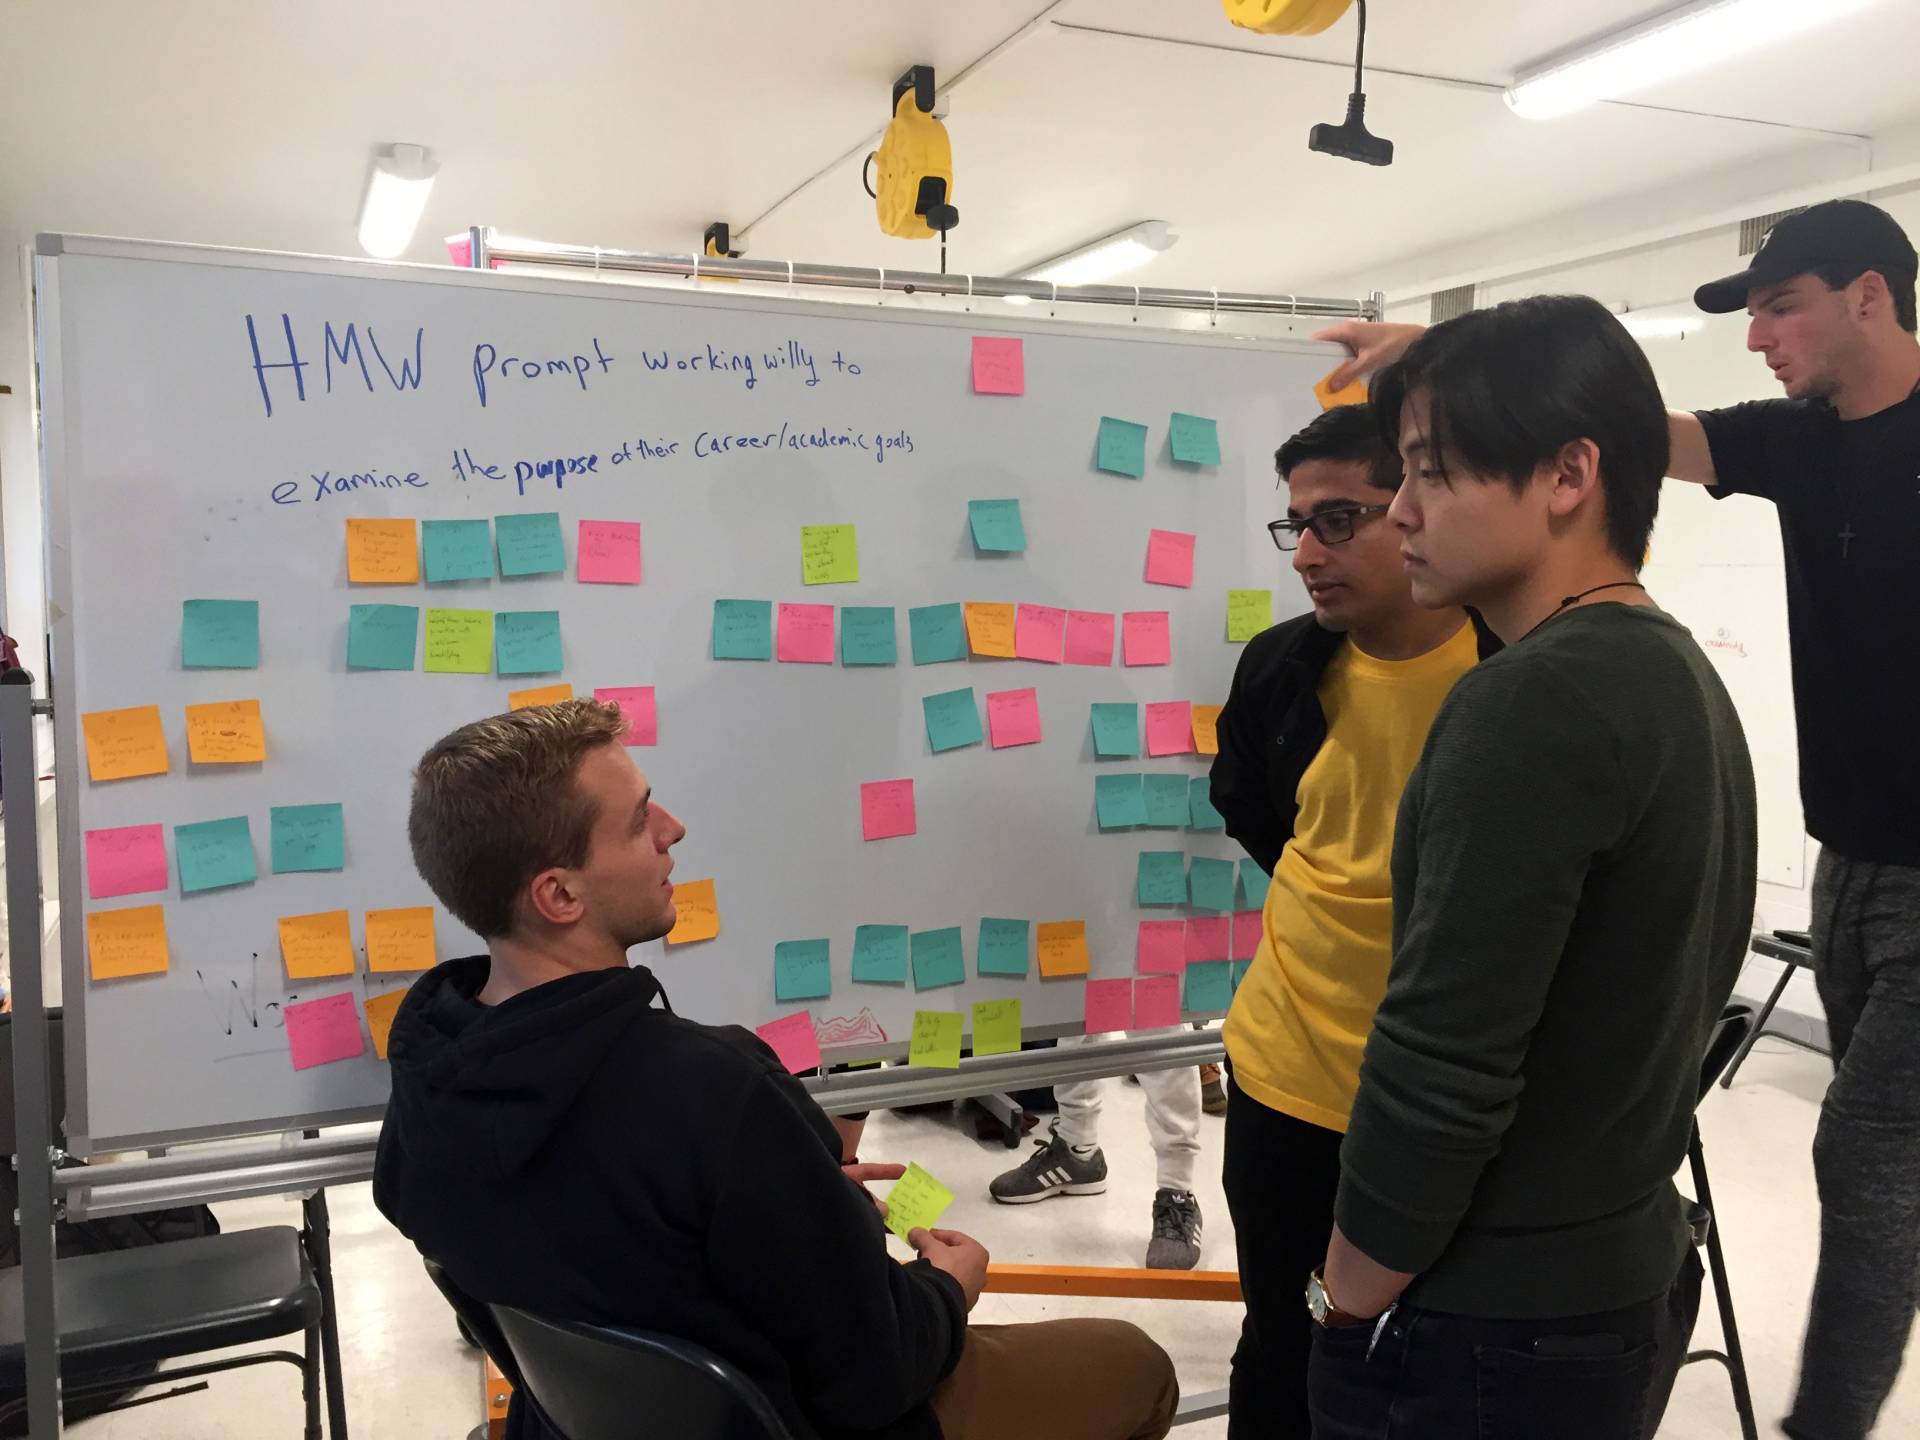 A team of students stands in front of a whiteboard covered in post-it notes